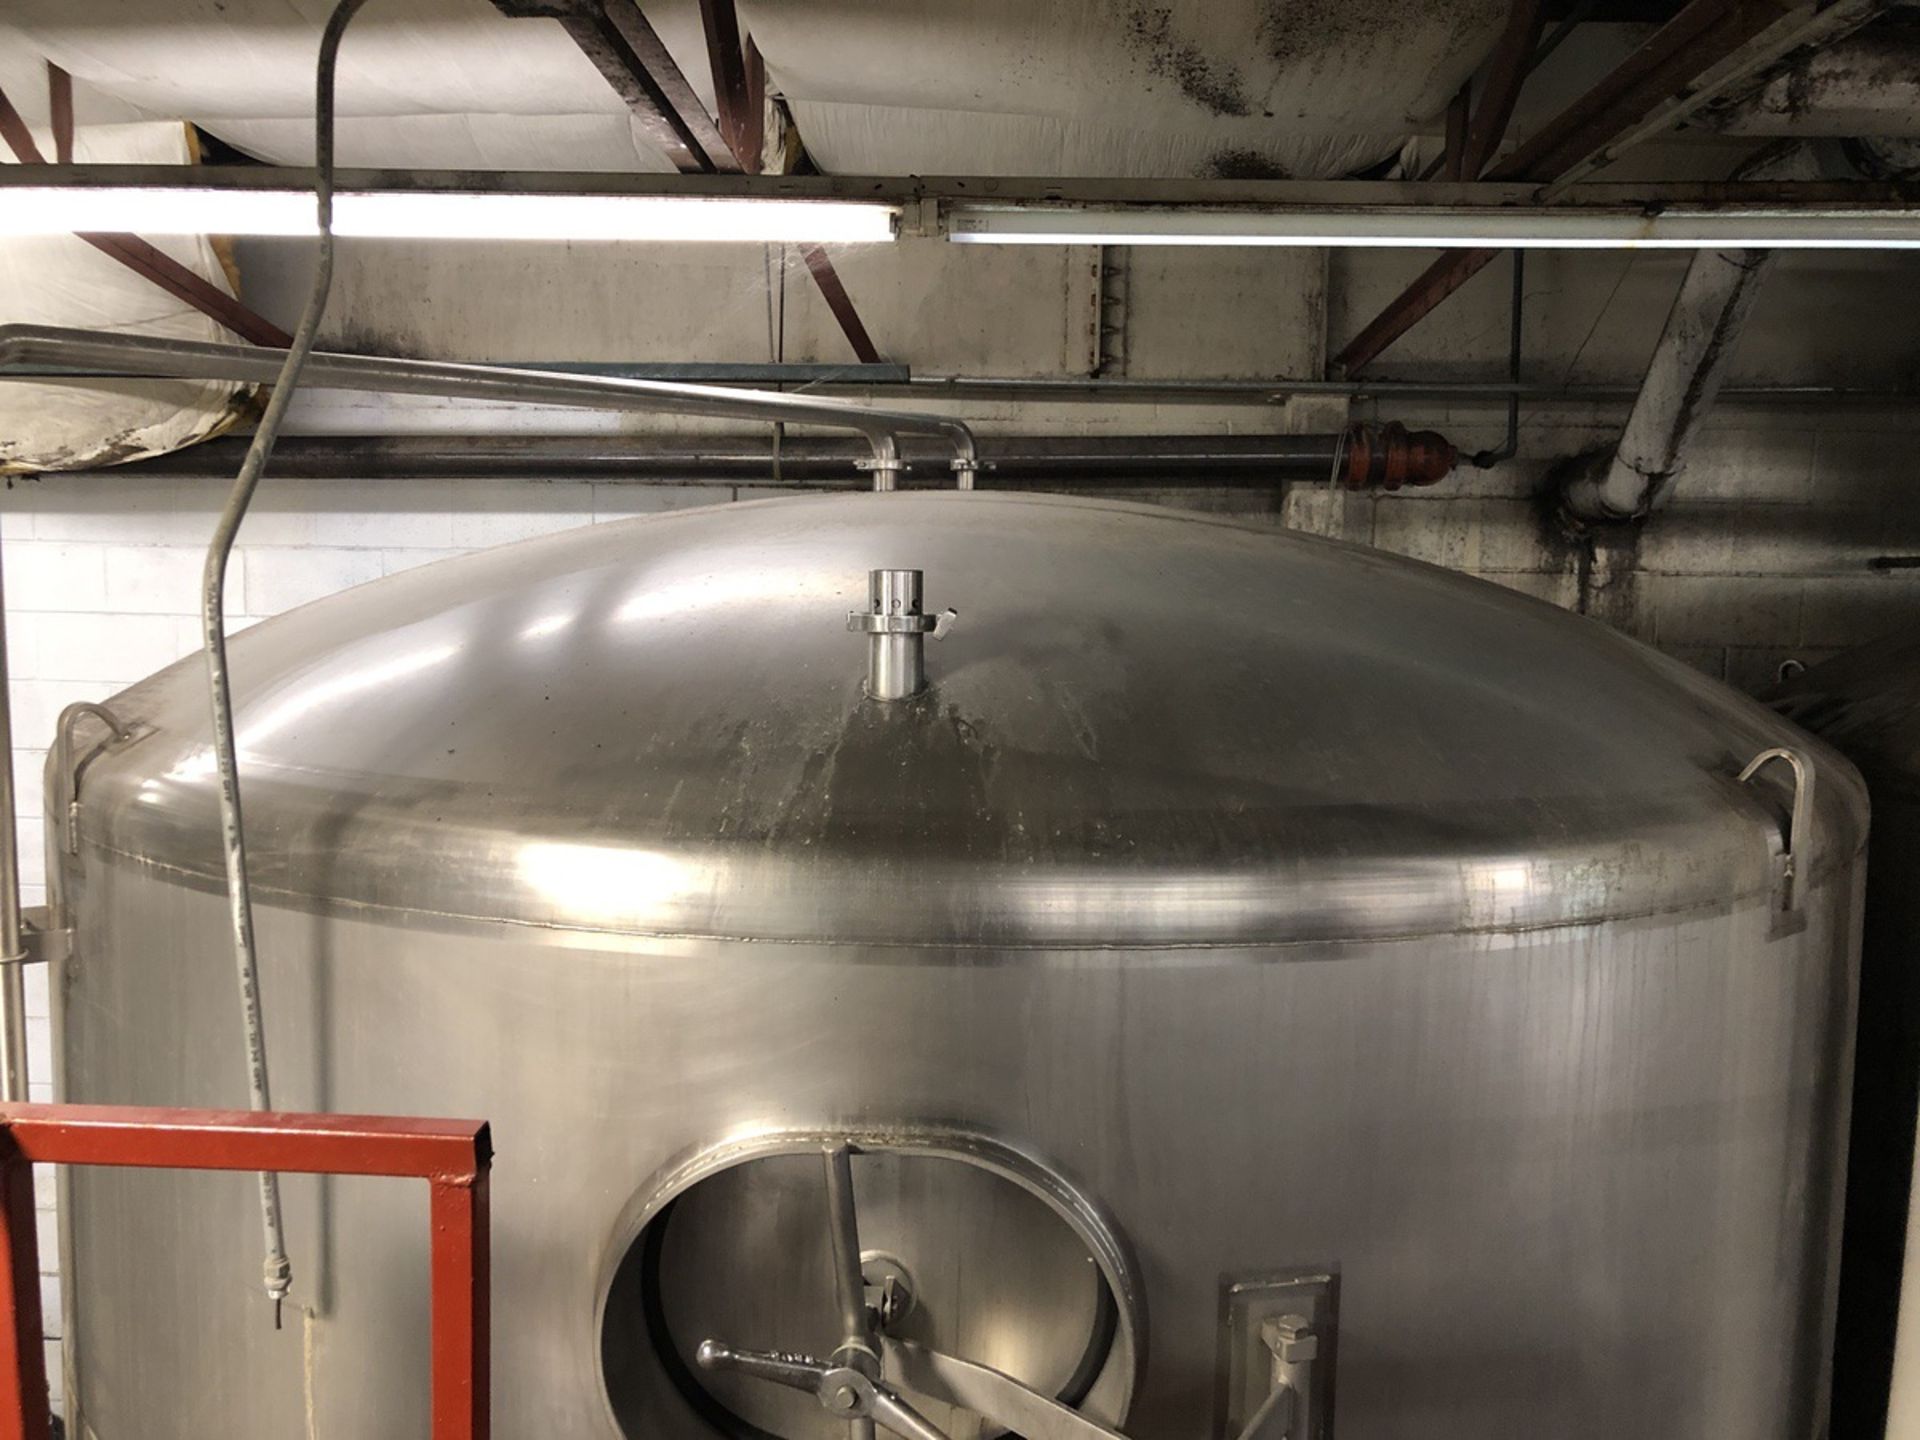 Santa Rosa 200 BBL Fermenter, Cone Bottom, Glycol Jacketed, Stainless Steel, Approx | Rig Fee: $3300 - Image 5 of 10